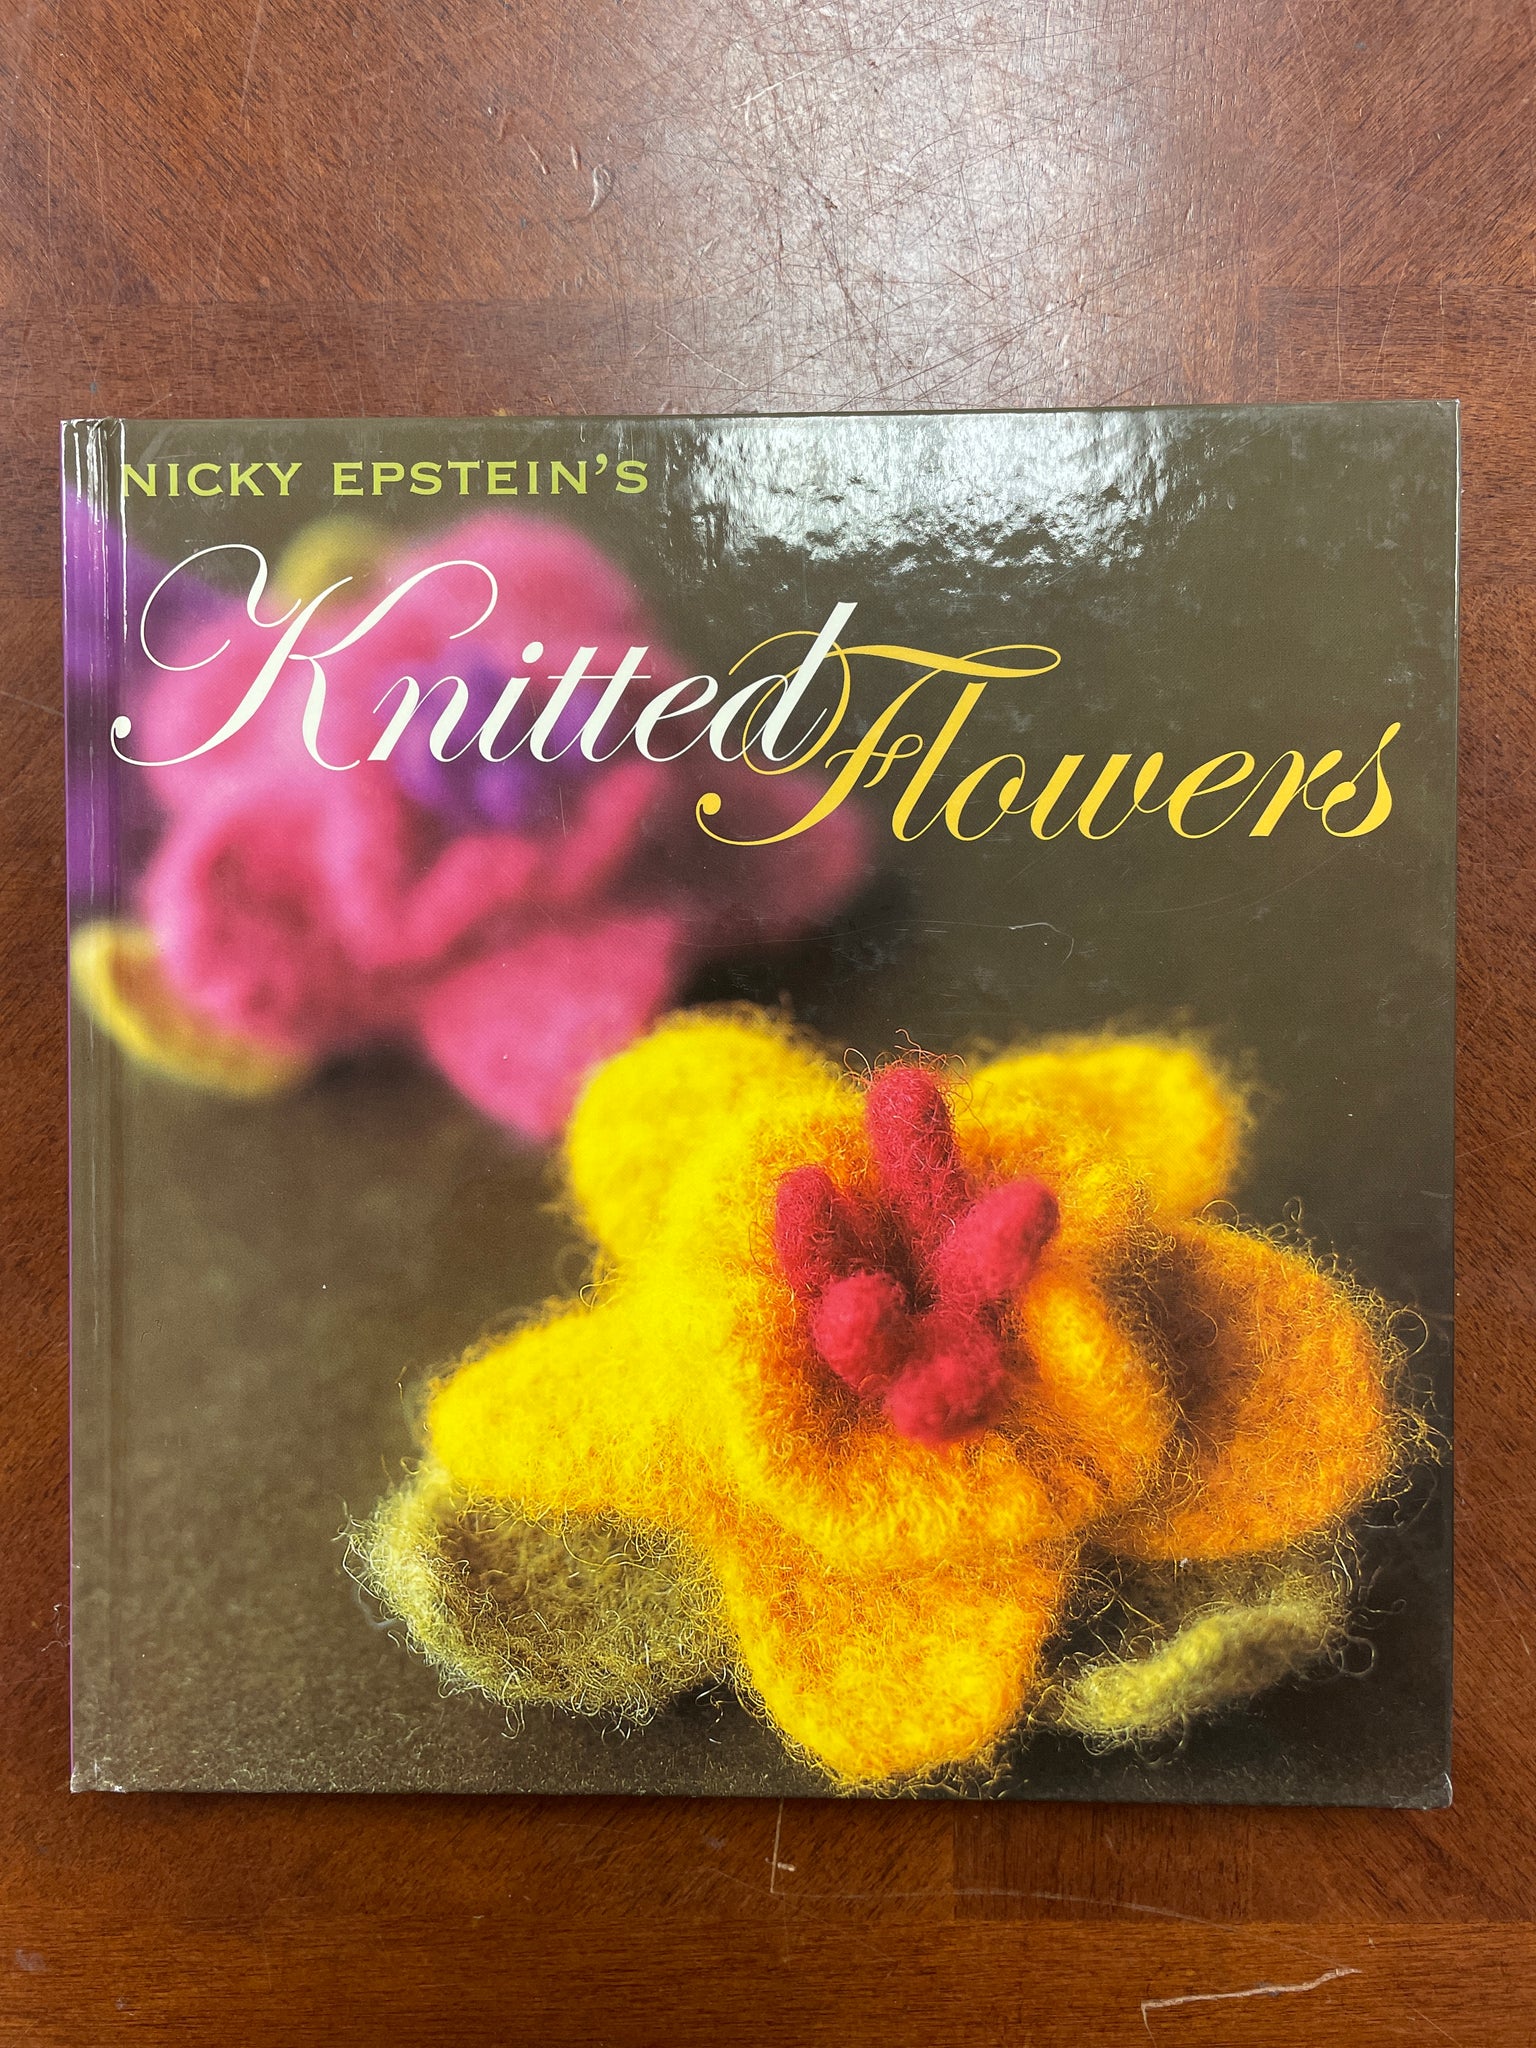 2006 Knitting Book - "Knitted Flowers"